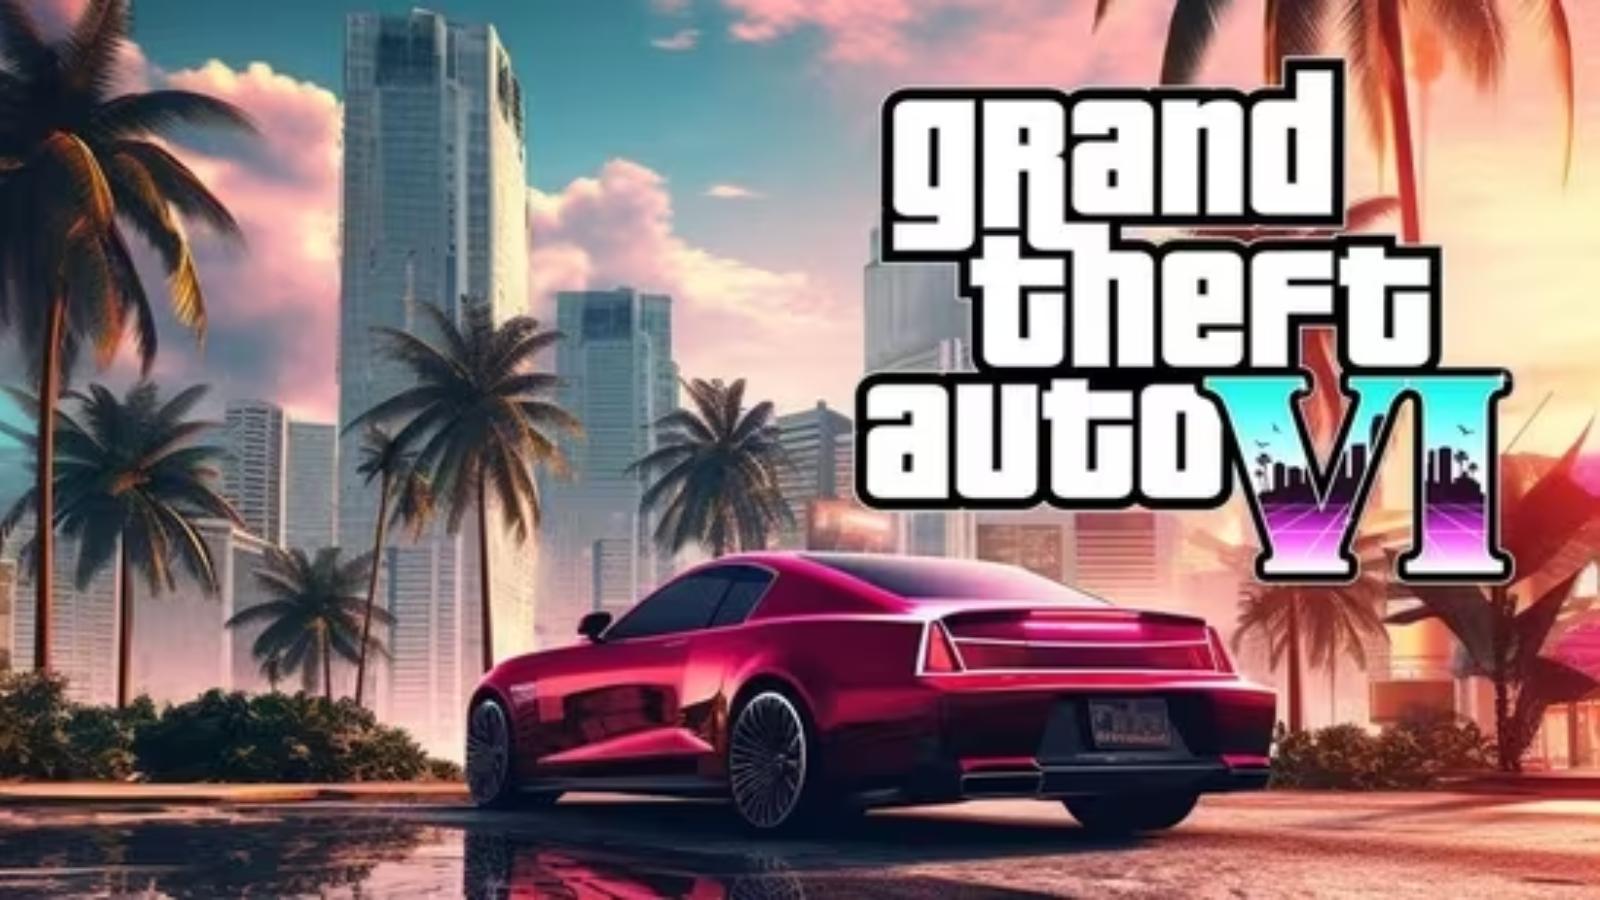 GTA News 🔴 RockstarINTEL.com on X: 🚀 Take-Two Interactive's stock has  rose further following the Grand Theft Auto VI trailer announcement. Rockstar  Games' parent company will report financial details in a few